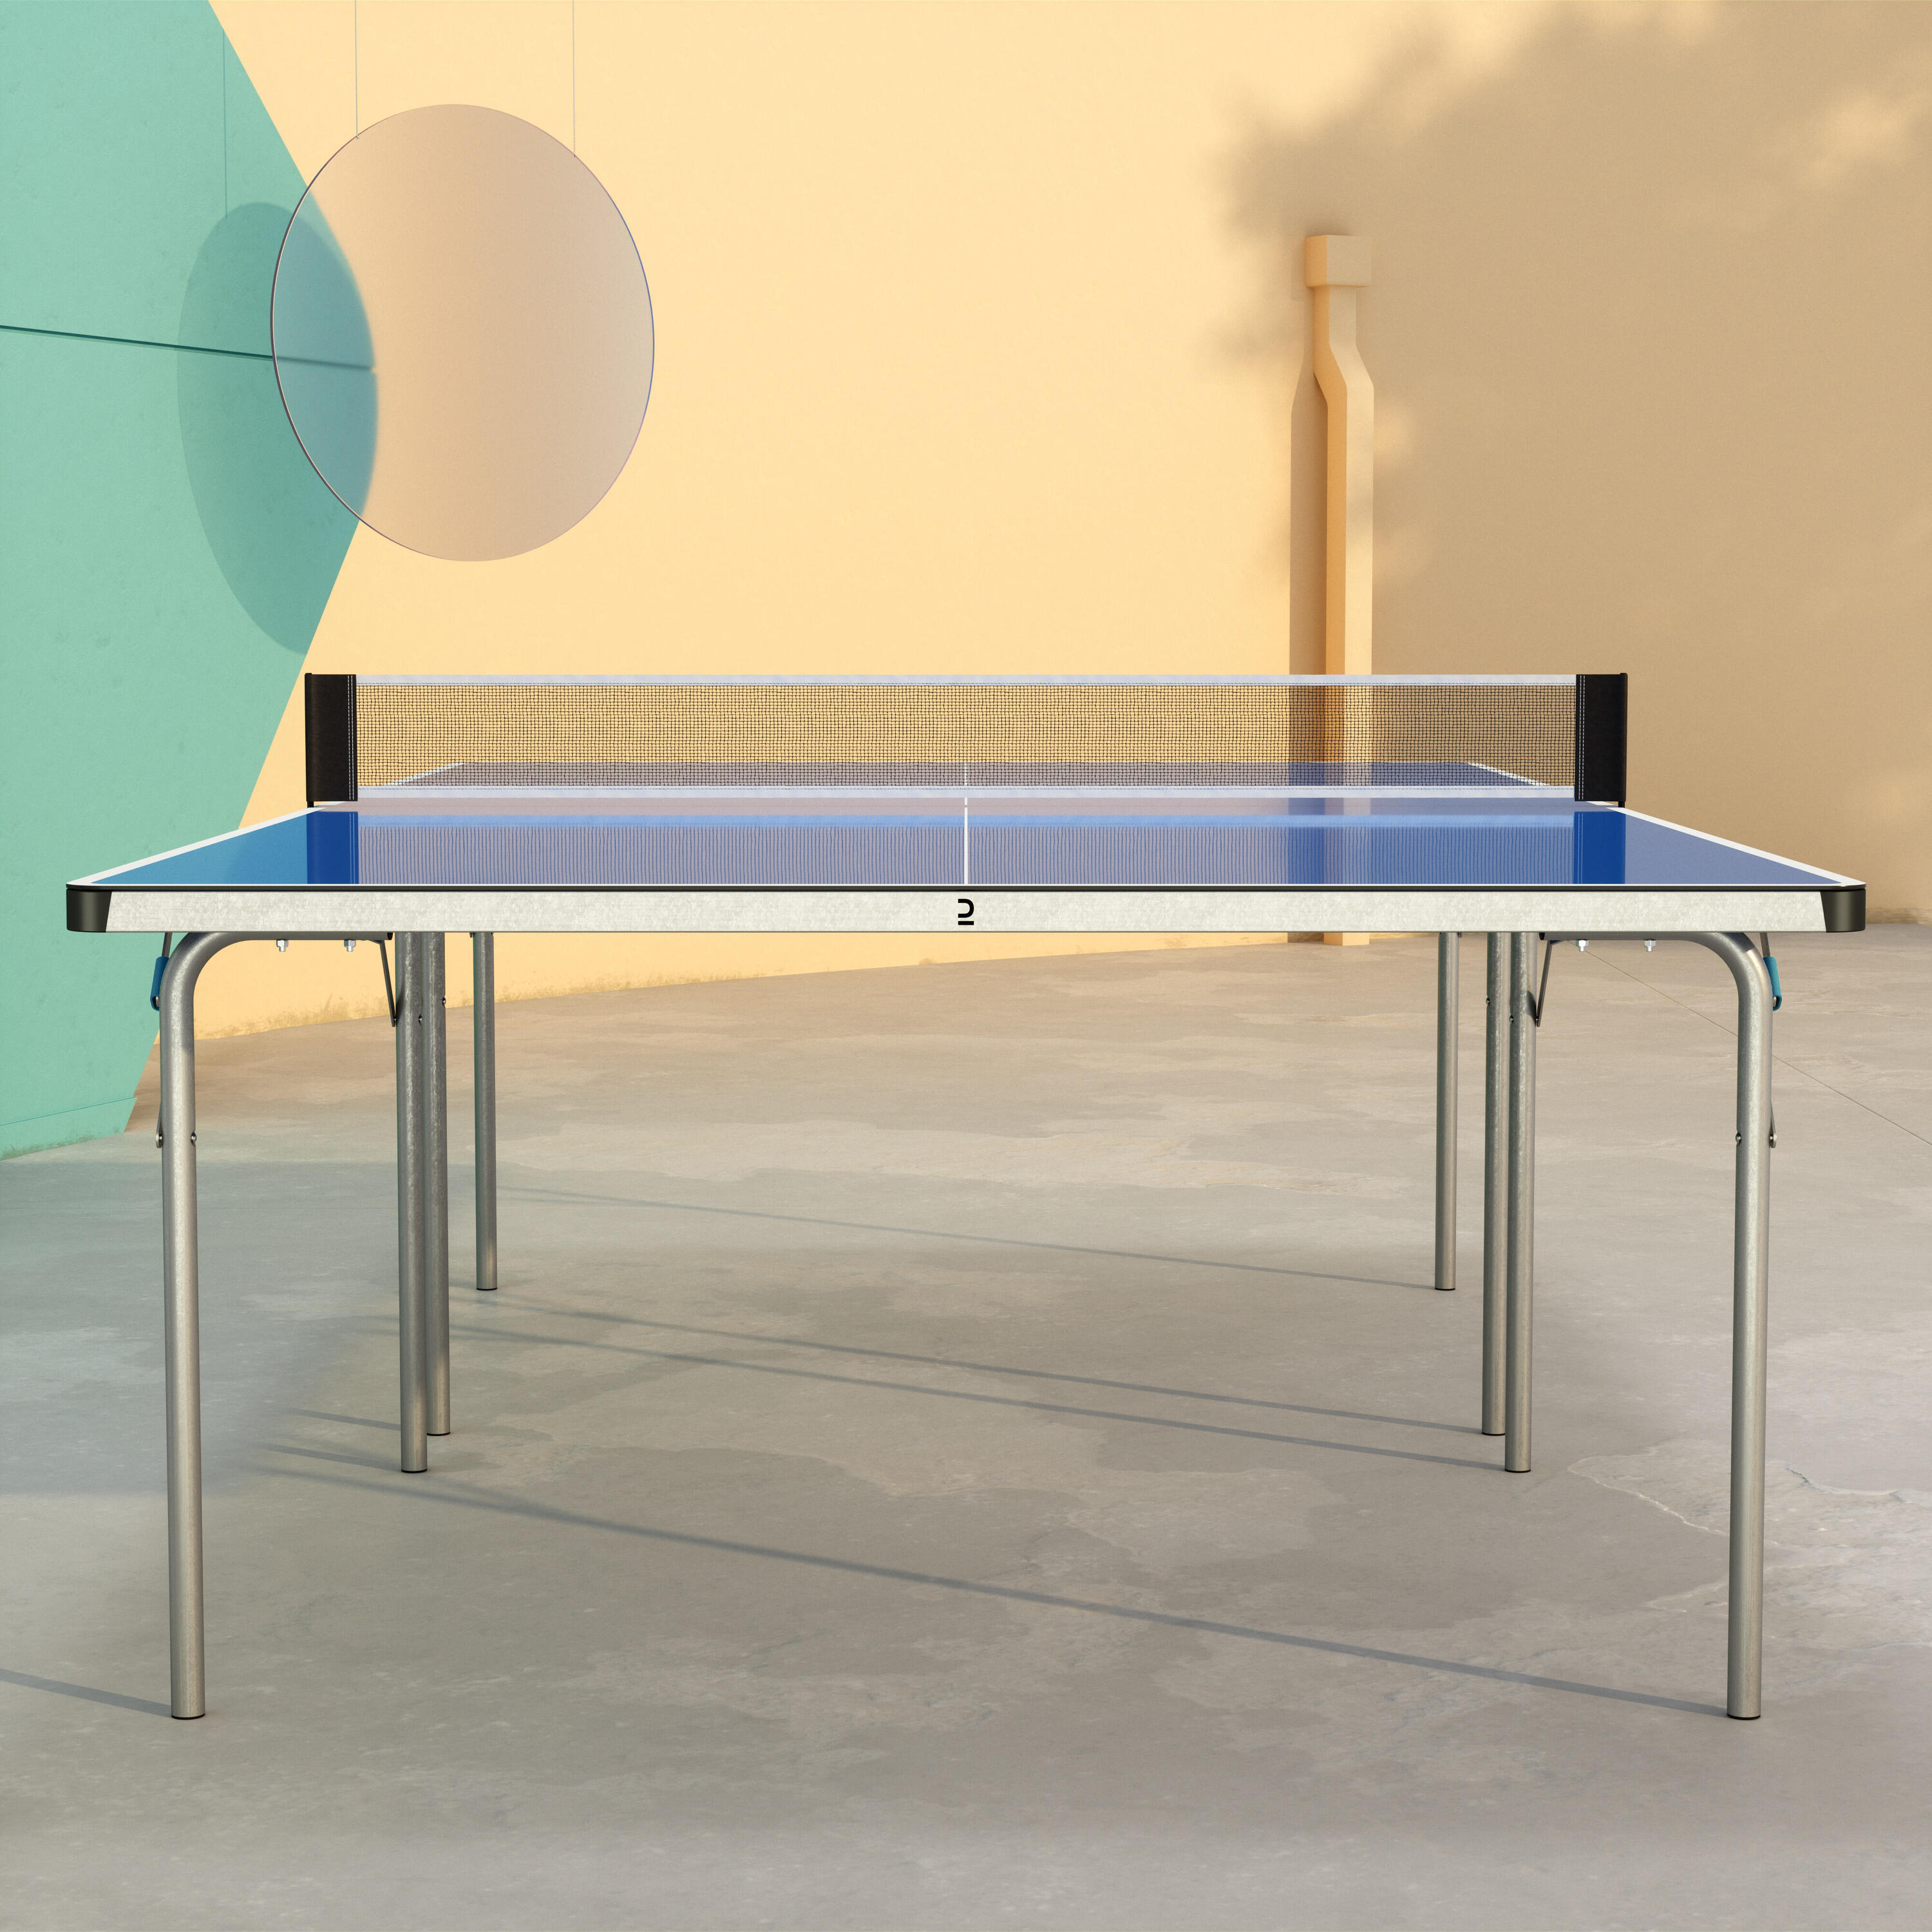 Outdoor Table Tennis Table PPT 130 - Blue 7/11